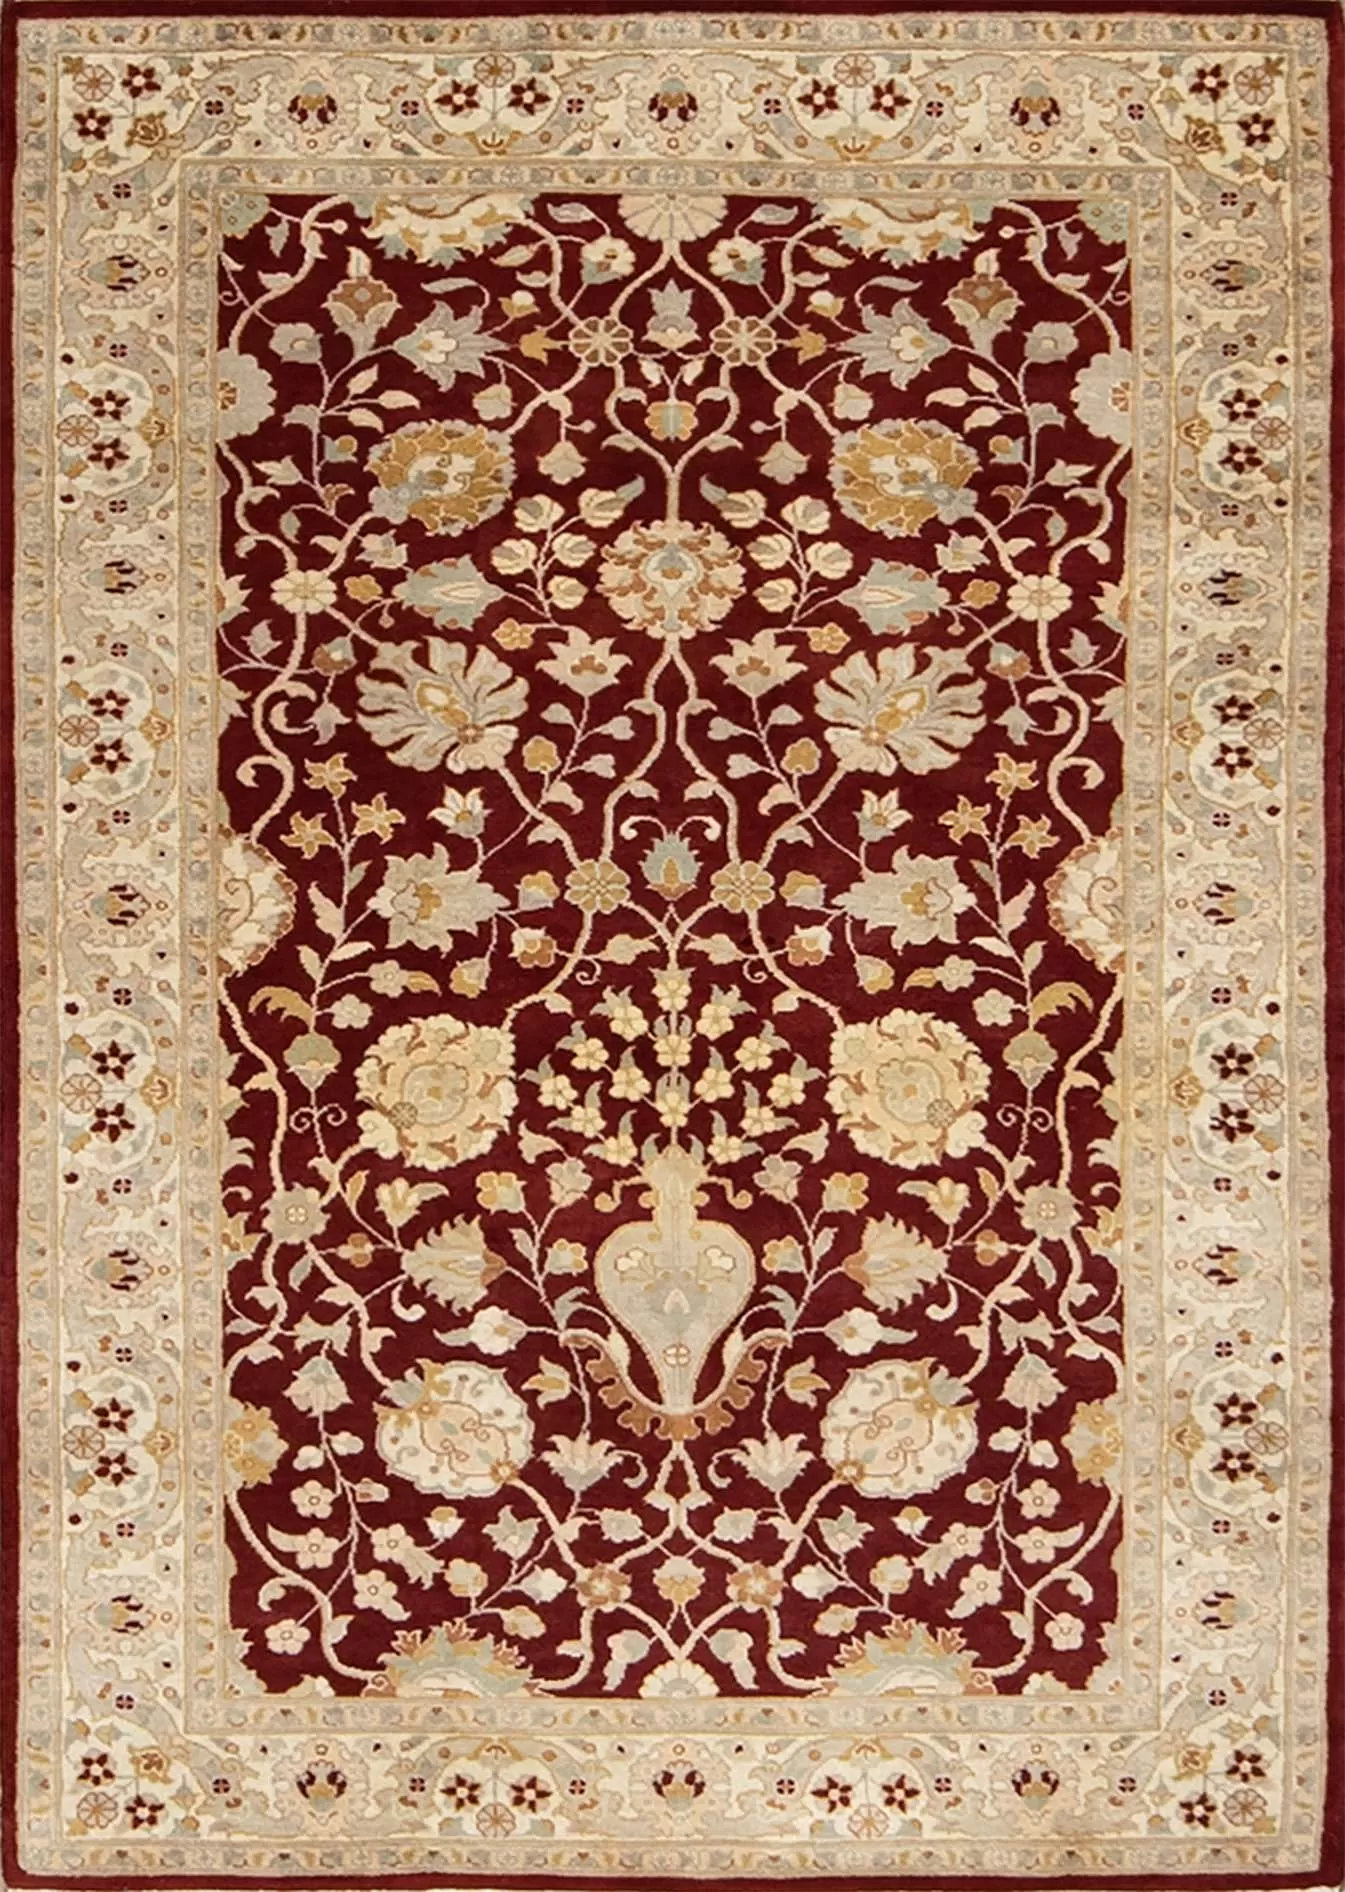 Handmade wool area rug made in Pakistan, a small area rug for small entryway. Size 3.2x5.3.